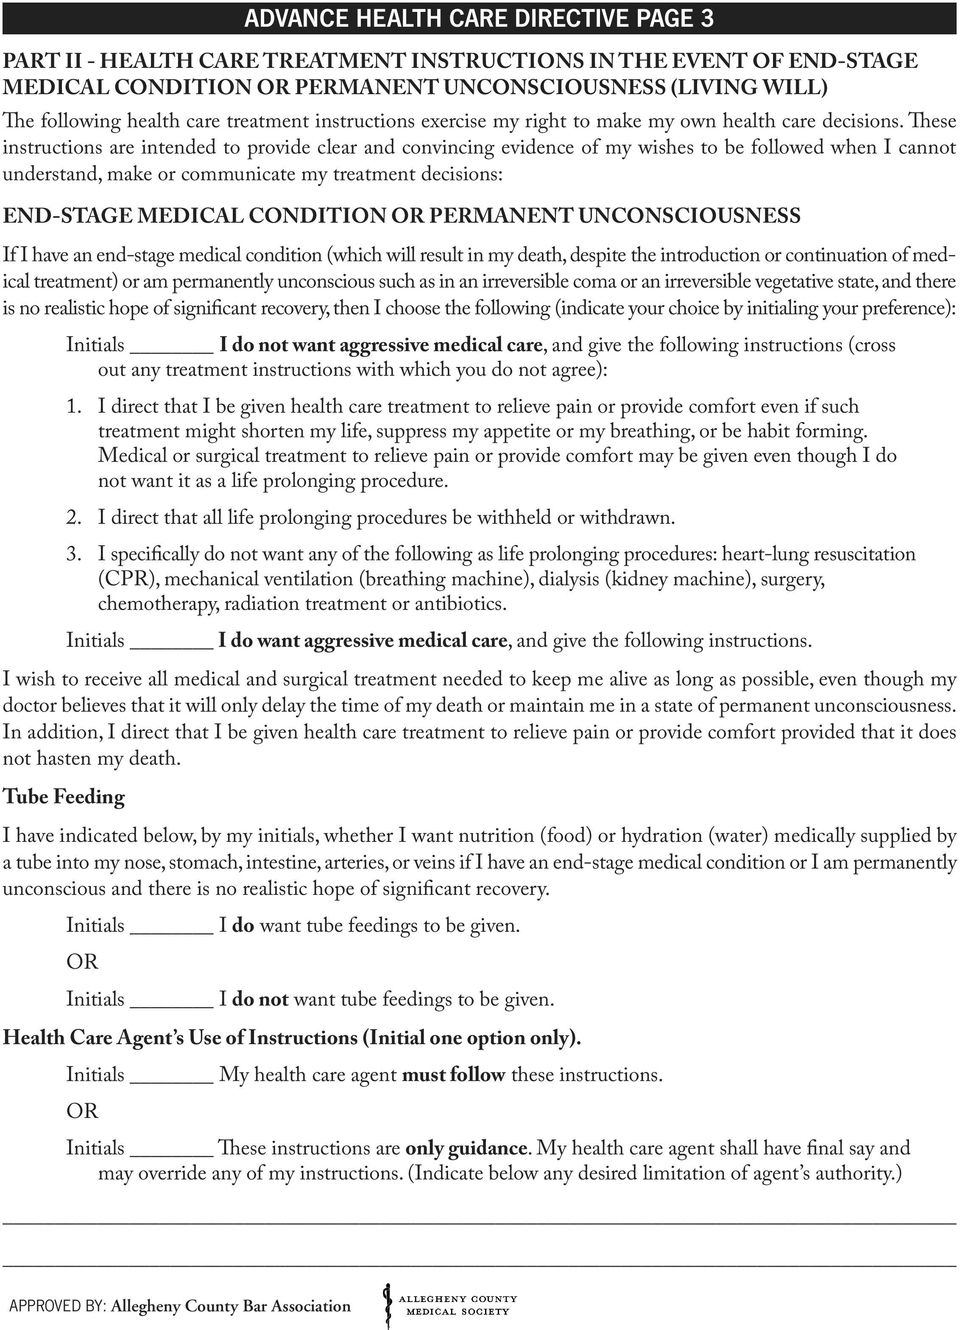 These instructions are intended to provide clear and convincing evidence of my wishes to be followed when I cannot understand, make or communicate my treatment decisions: END-STAGE MEDICAL CONDITION